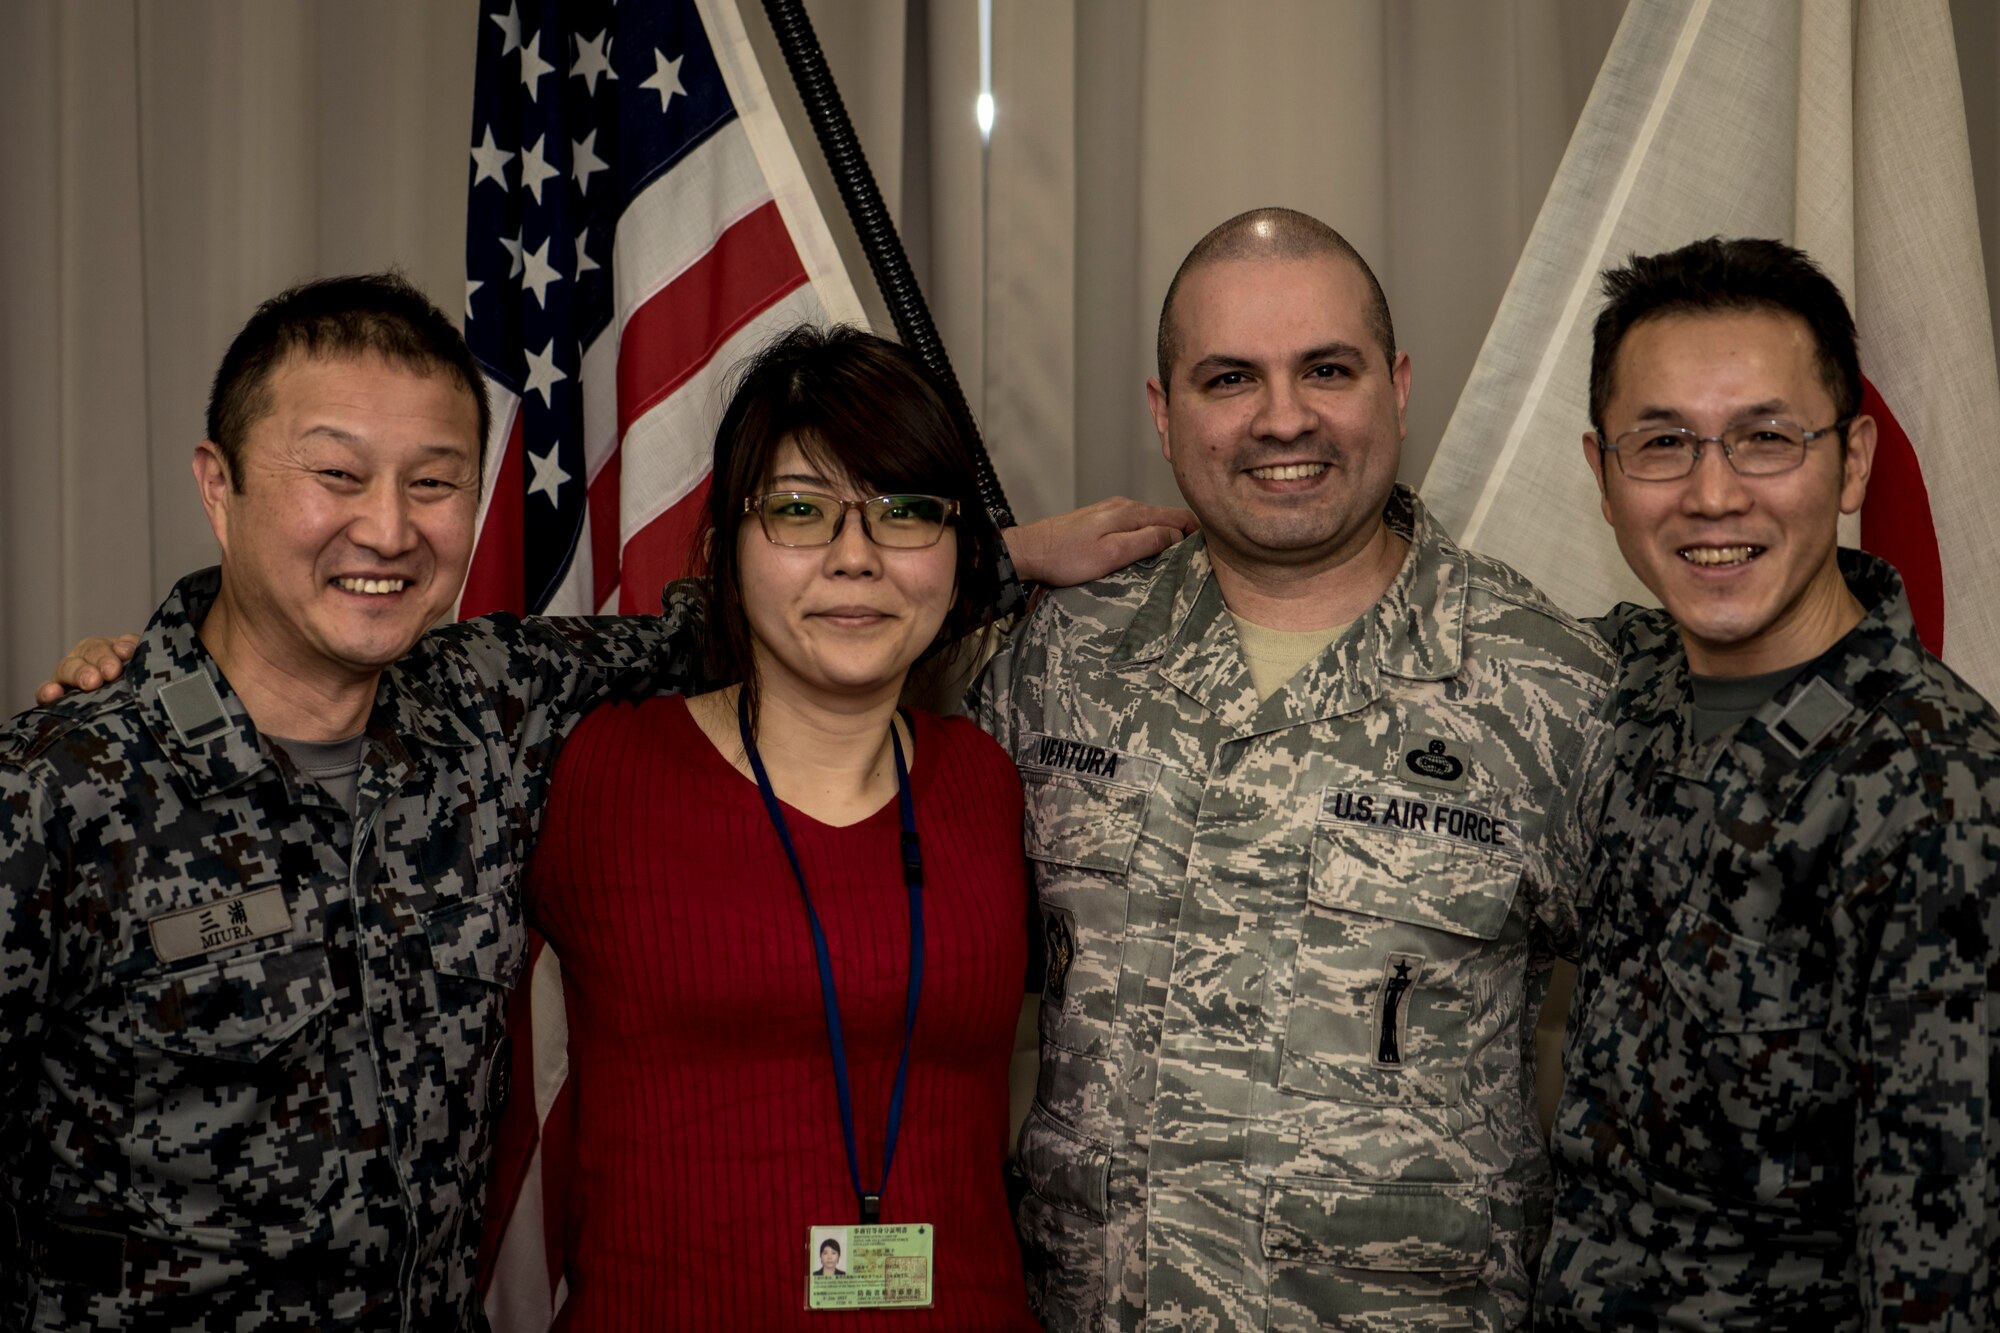 Japan Air Self-Defense Force Warrant Officer Junji Miura, left, the 3rd Air Wing command chief, Noriko Ohtani, center left, a 3rd AW U.S. Relations Section member, U.S. Air Force Master Sgt. Cesar Ventura, center right, a 35th Fighter Wing inspector general vertical inspections planner, and JASDF Warrant Officer Tsuyoshi Endo, right, the former 6th Air Defense Missile Group chief and Senior Noncommissioned Officer Association president, pose for a photo in the 3rd AW headquarters at Misawa Air Base, Japan, Feb. 14, 2018. In the past four years, Ventura worked with Miura, Endo and Ohtani on numerous bilateral events bringing U.S. and Japan servicemembers closer as allies and friends. Ventura attributes his success to his Hispanic upbringing and seeks new adventures every day where he can learn something new about another's culture. (U.S. Air Force photo by Tech. Sgt. Benjamin W. Stratton)